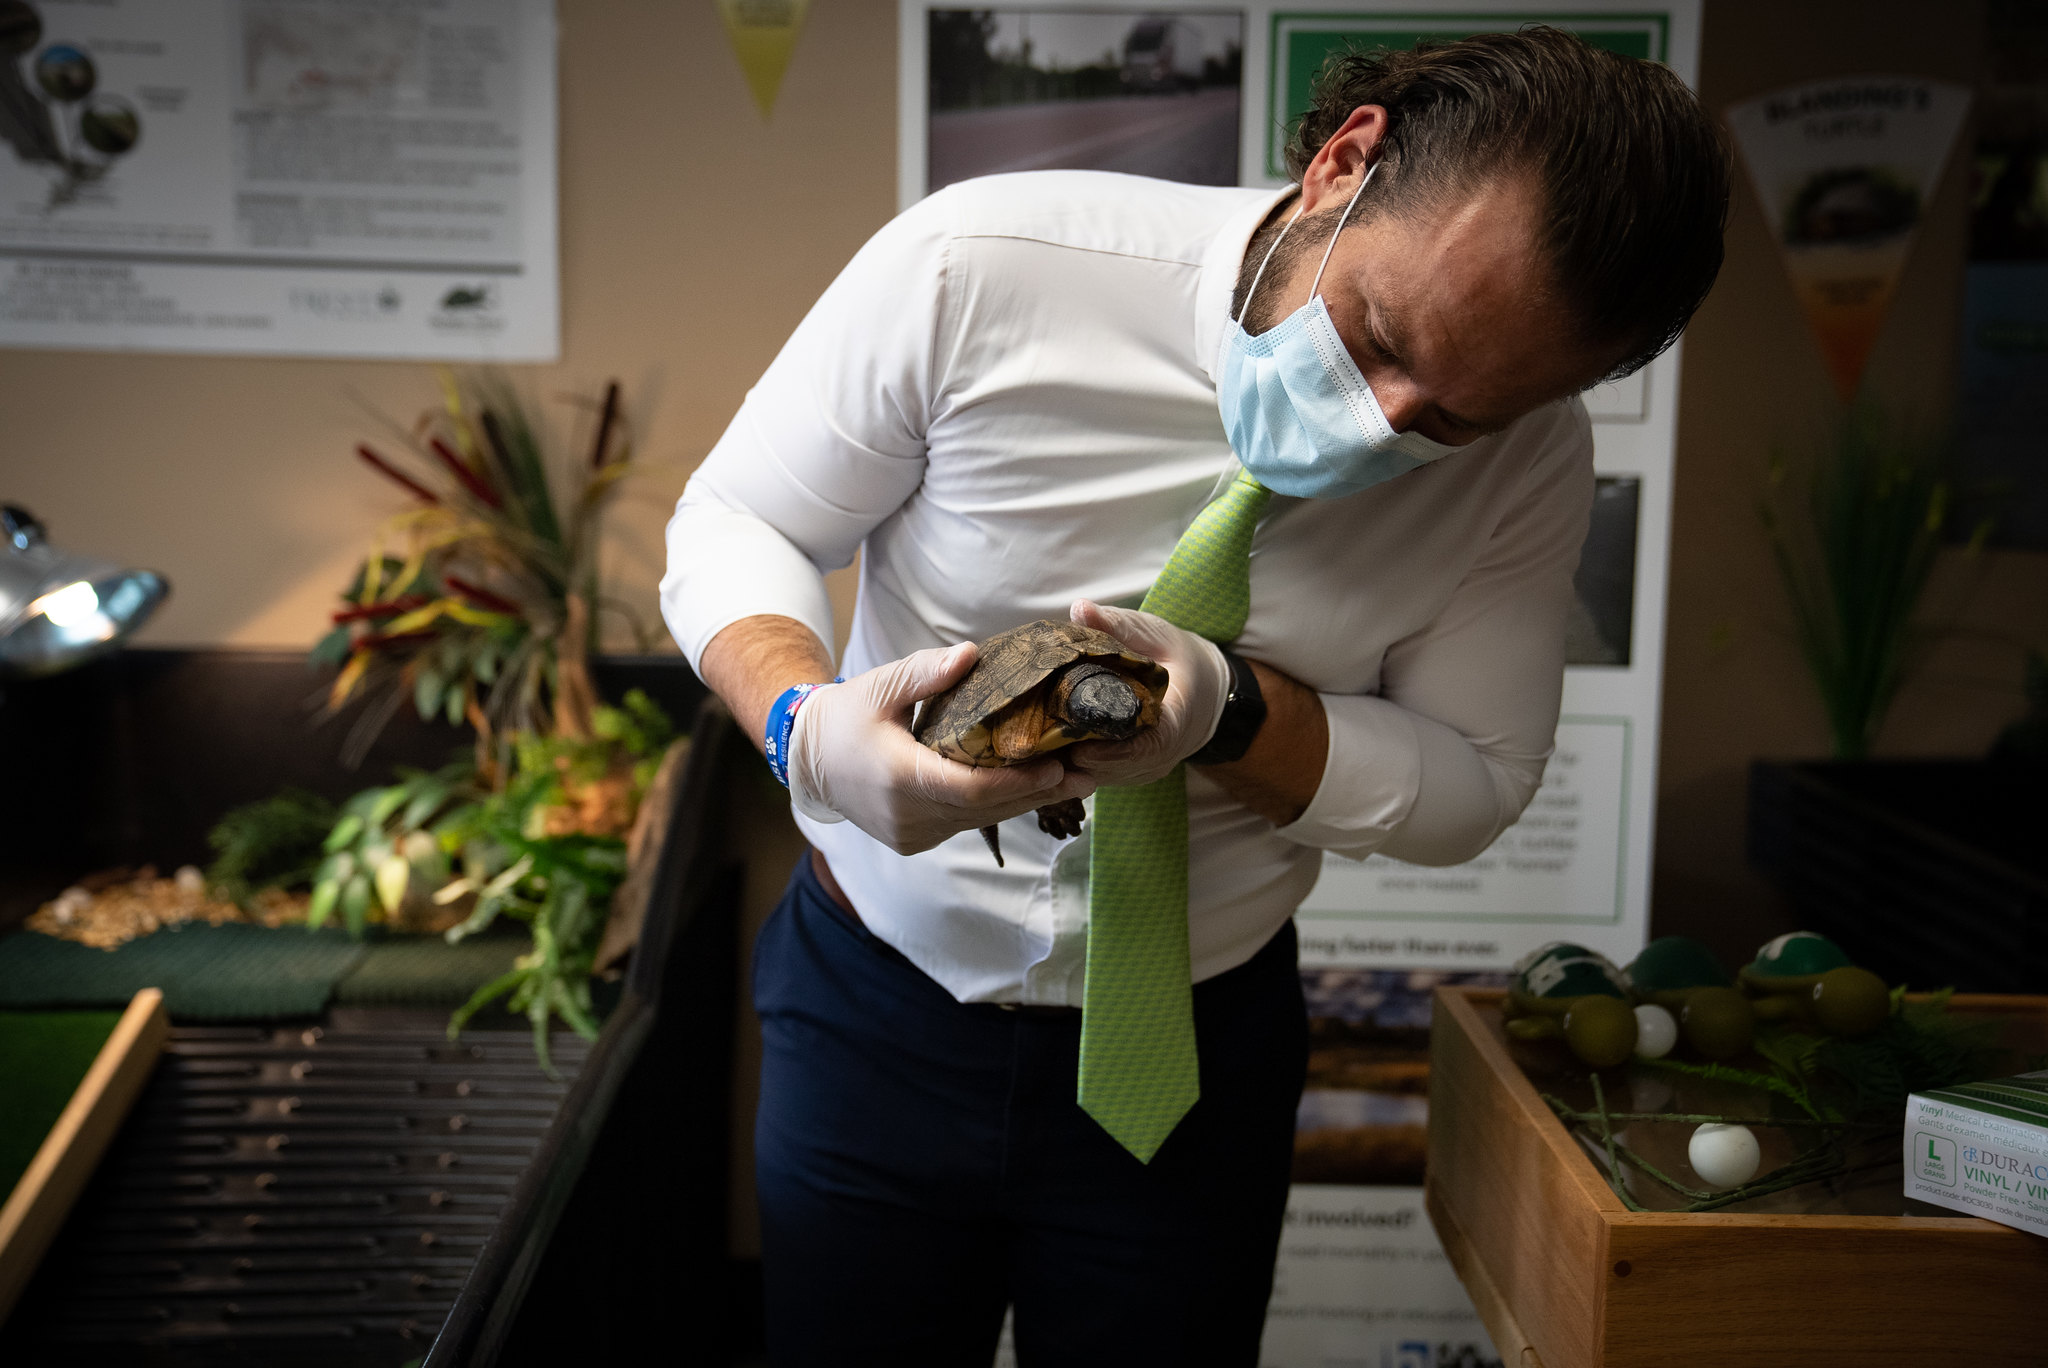 Ontario Environment Minister David Piccini, wearing a white shirt, green tie and a medical mask and gloves,  bends over to look at a turtle in his hands.